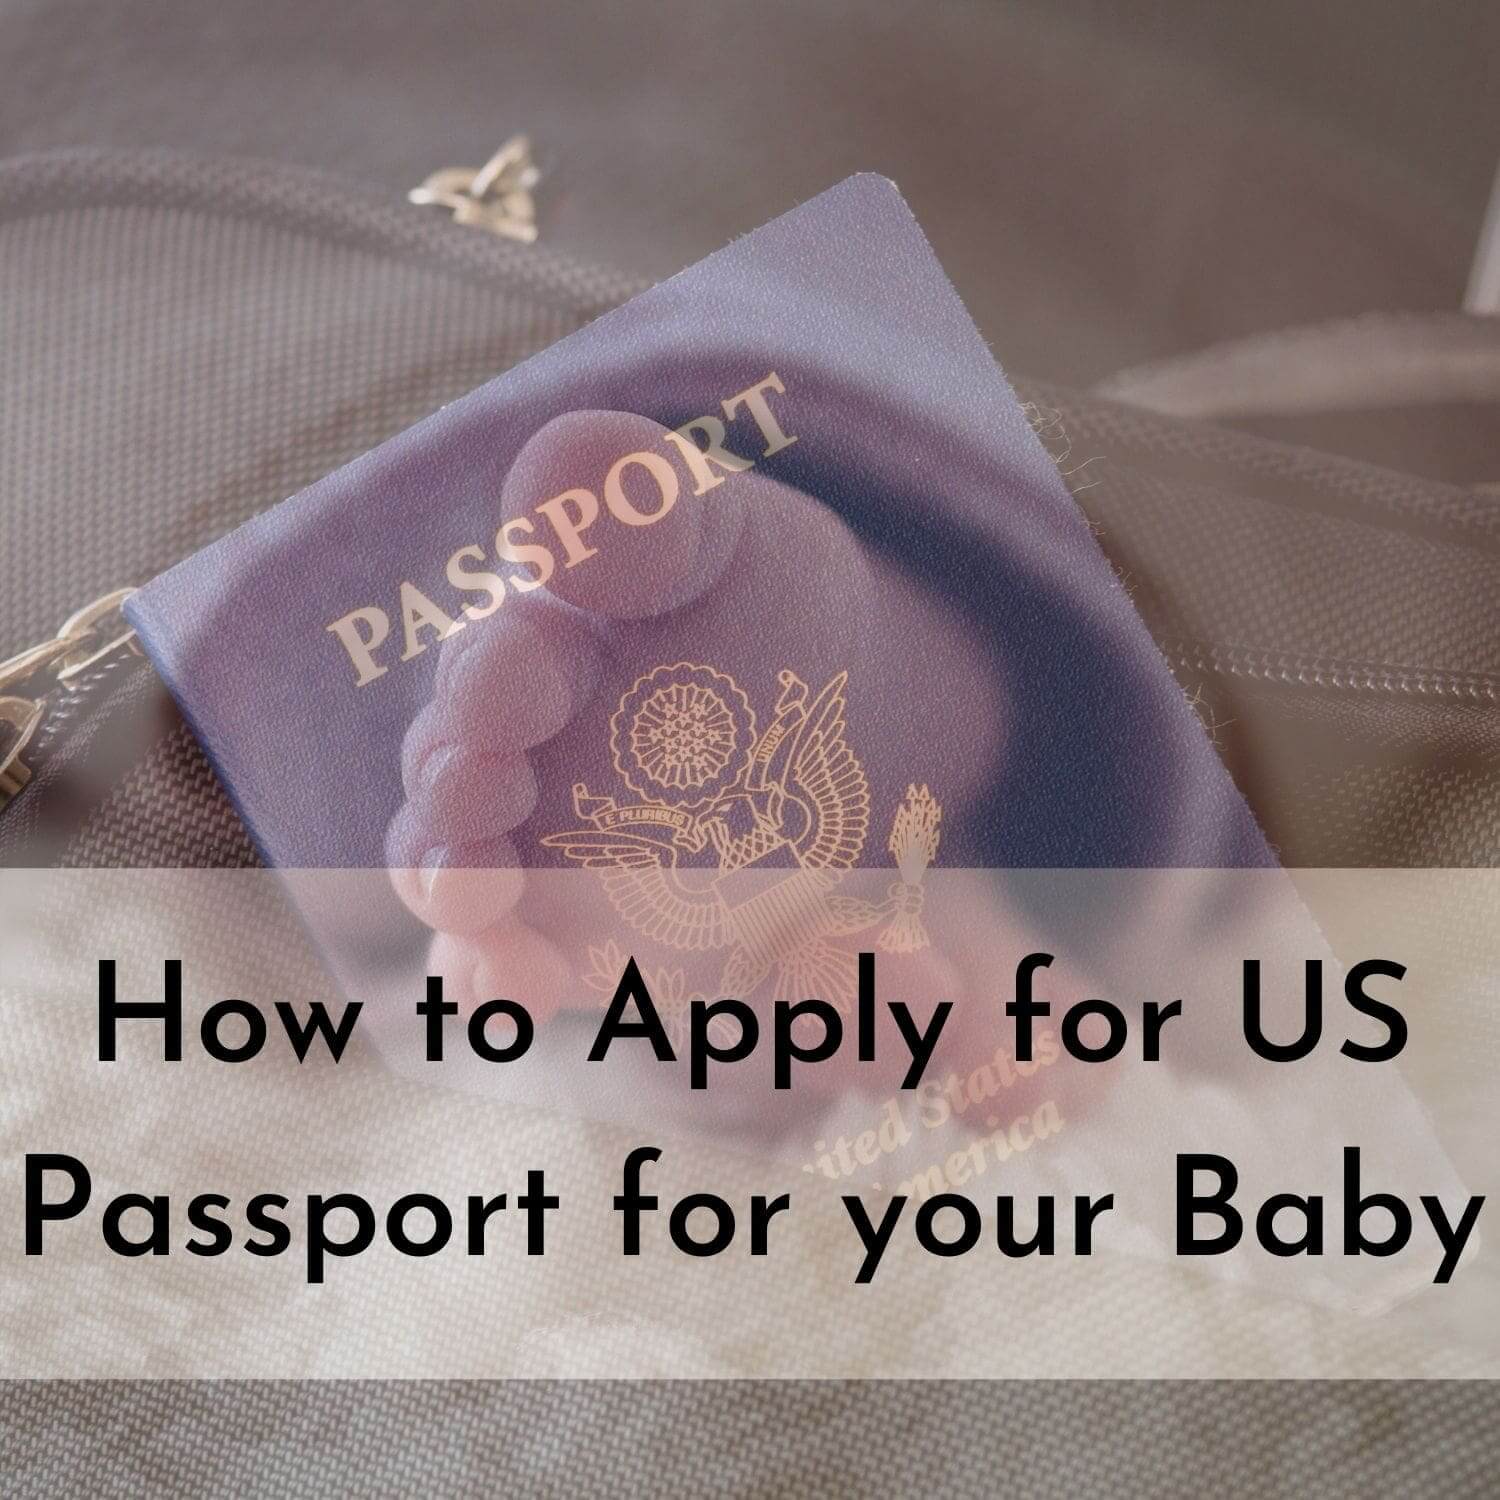 How to Apply for US Passport for your Baby